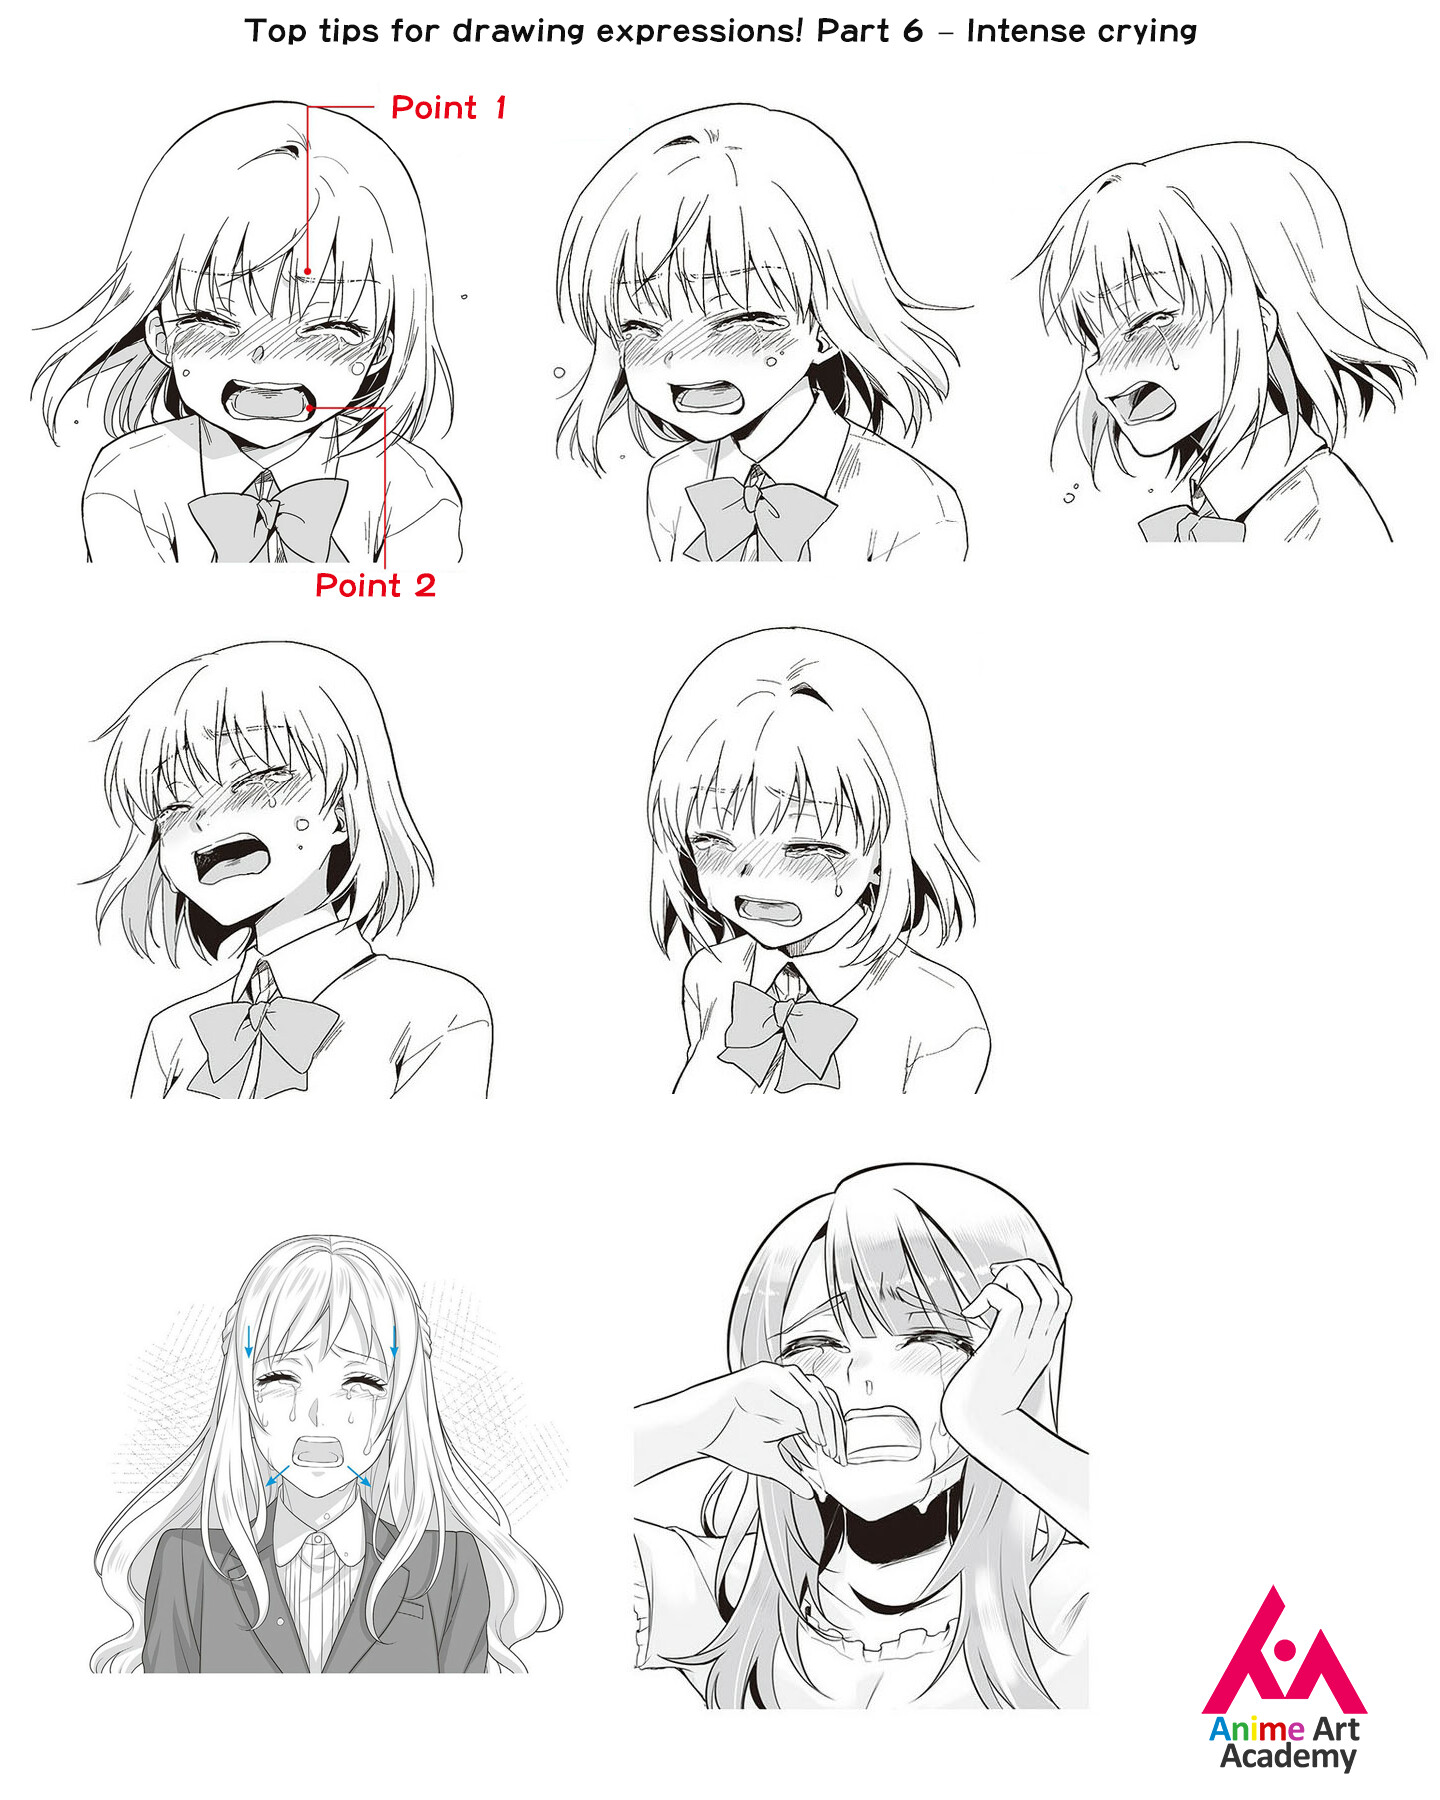 ArtStation - Top tips for drawing expressions! Part 6 – Intense crying